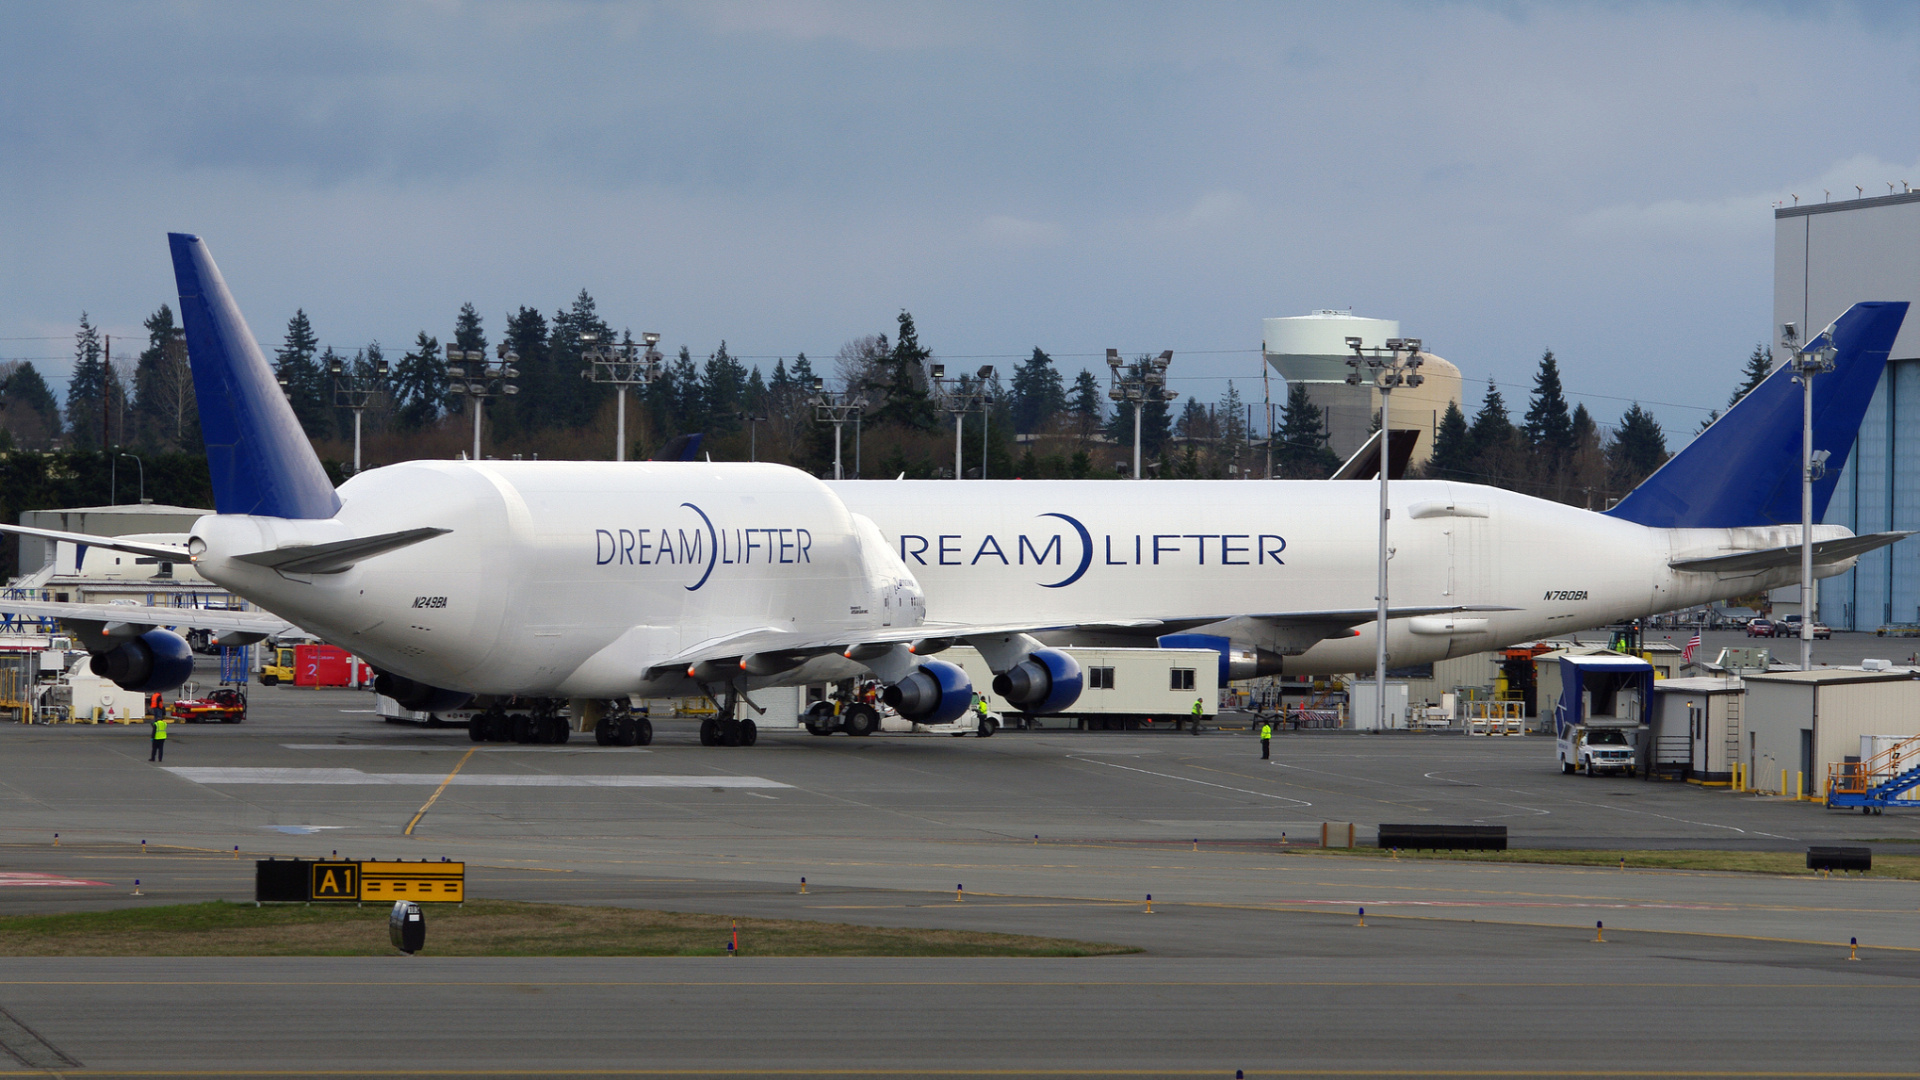 20+ Boeing 747 Dreamlifter HD Wallpapers and Backgrounds 1920x1080